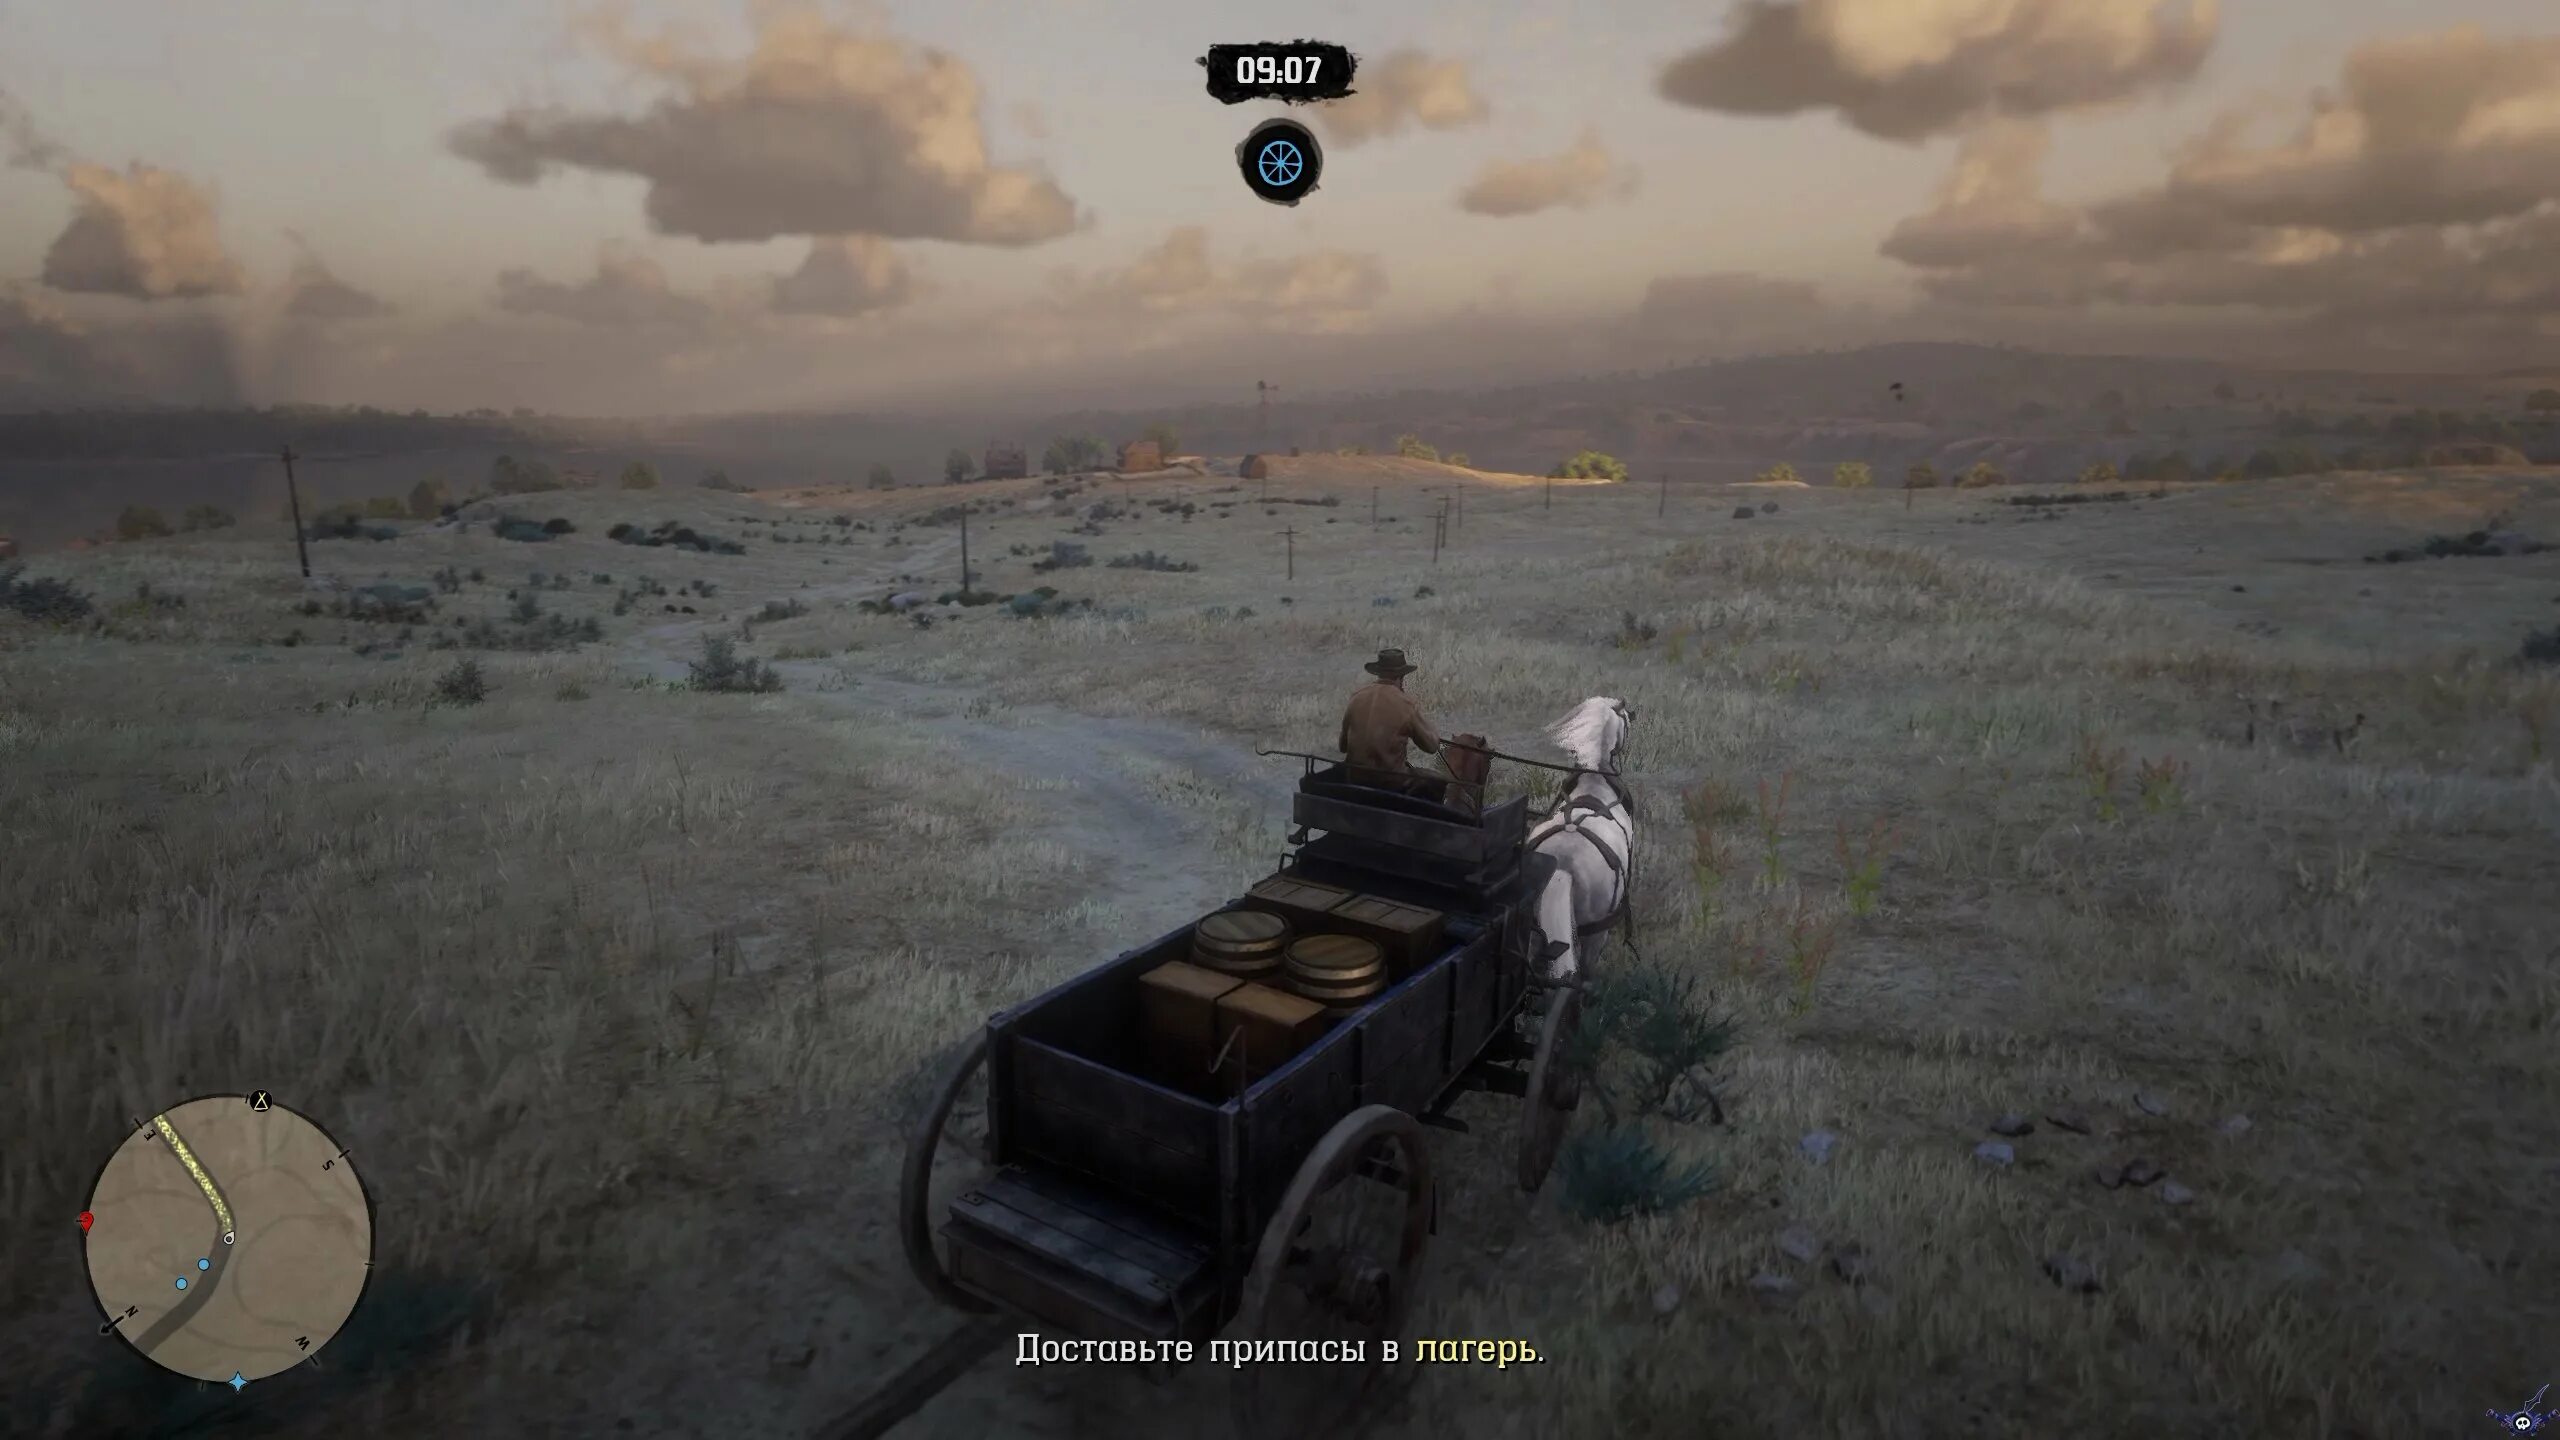 Red Dead Redemption 2. Red Dead Redemption 1 геймплей. Red Dead Redemption 2 геймплей. Red Dead Redemption 2 игровой процесс.